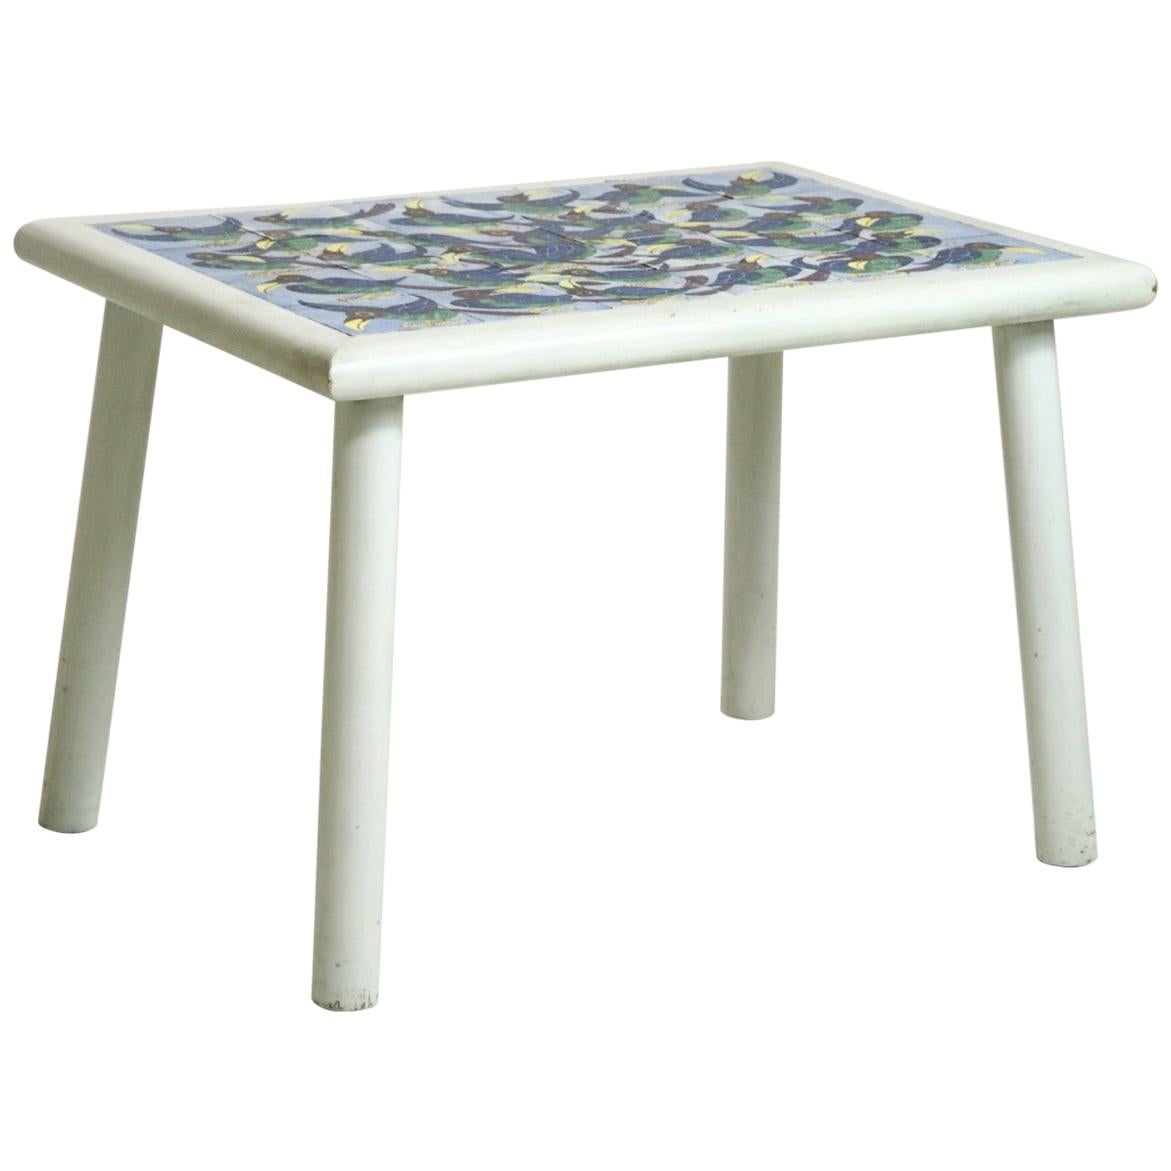 Rare Danish Tile-Top Table, Signed "AT '57", Philip Arctander Style For Sale